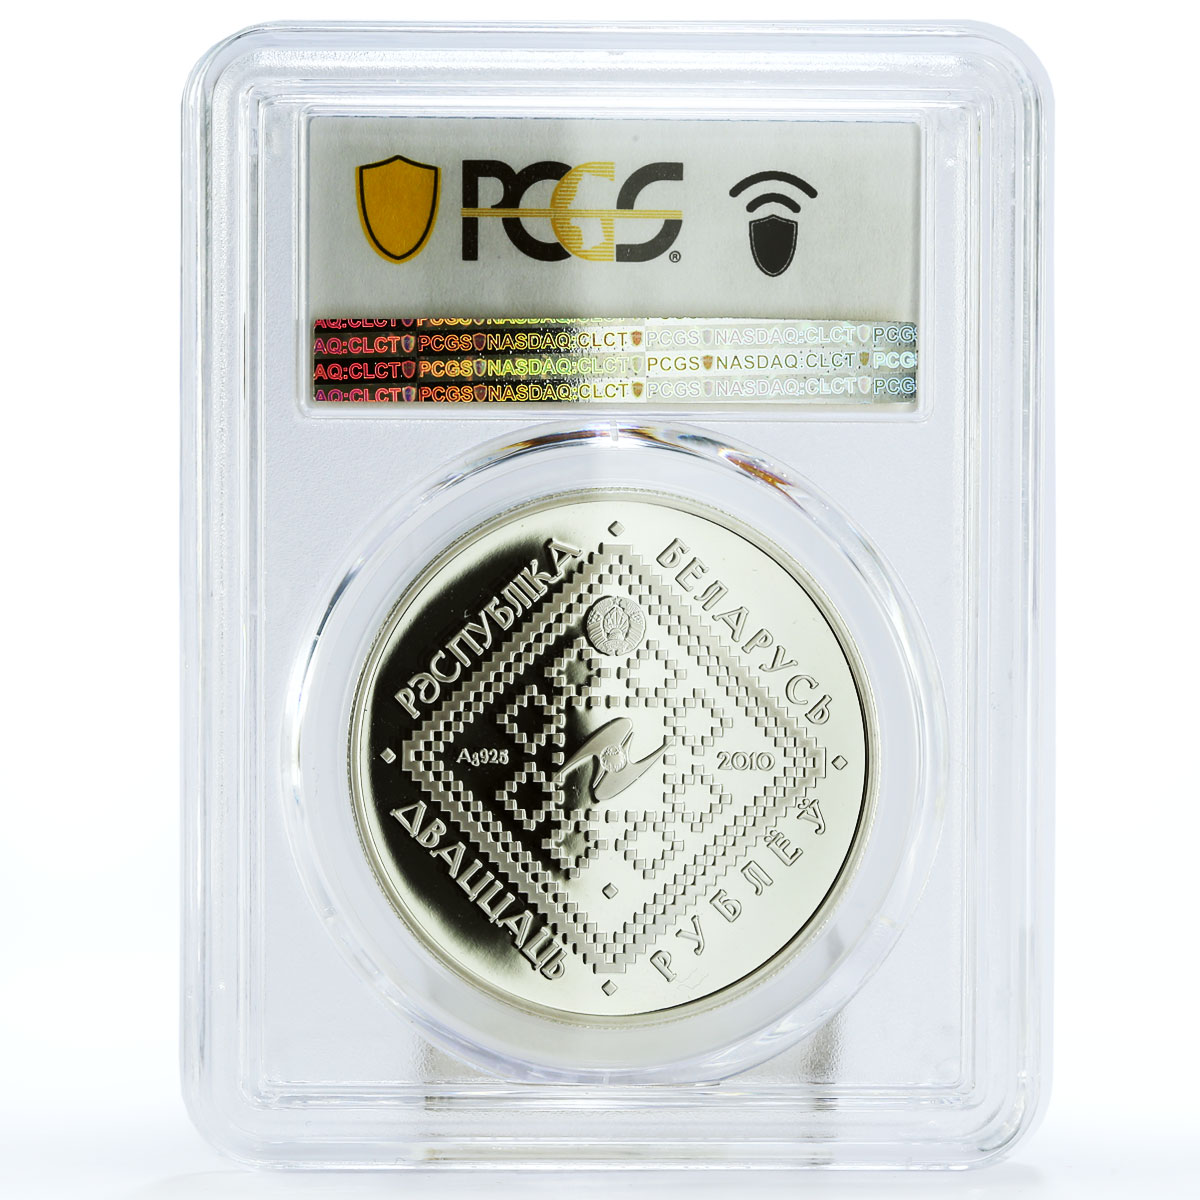 Belarus 20 rubles Customs and Rites Candlemas PR70 PCGS silver coin 2010